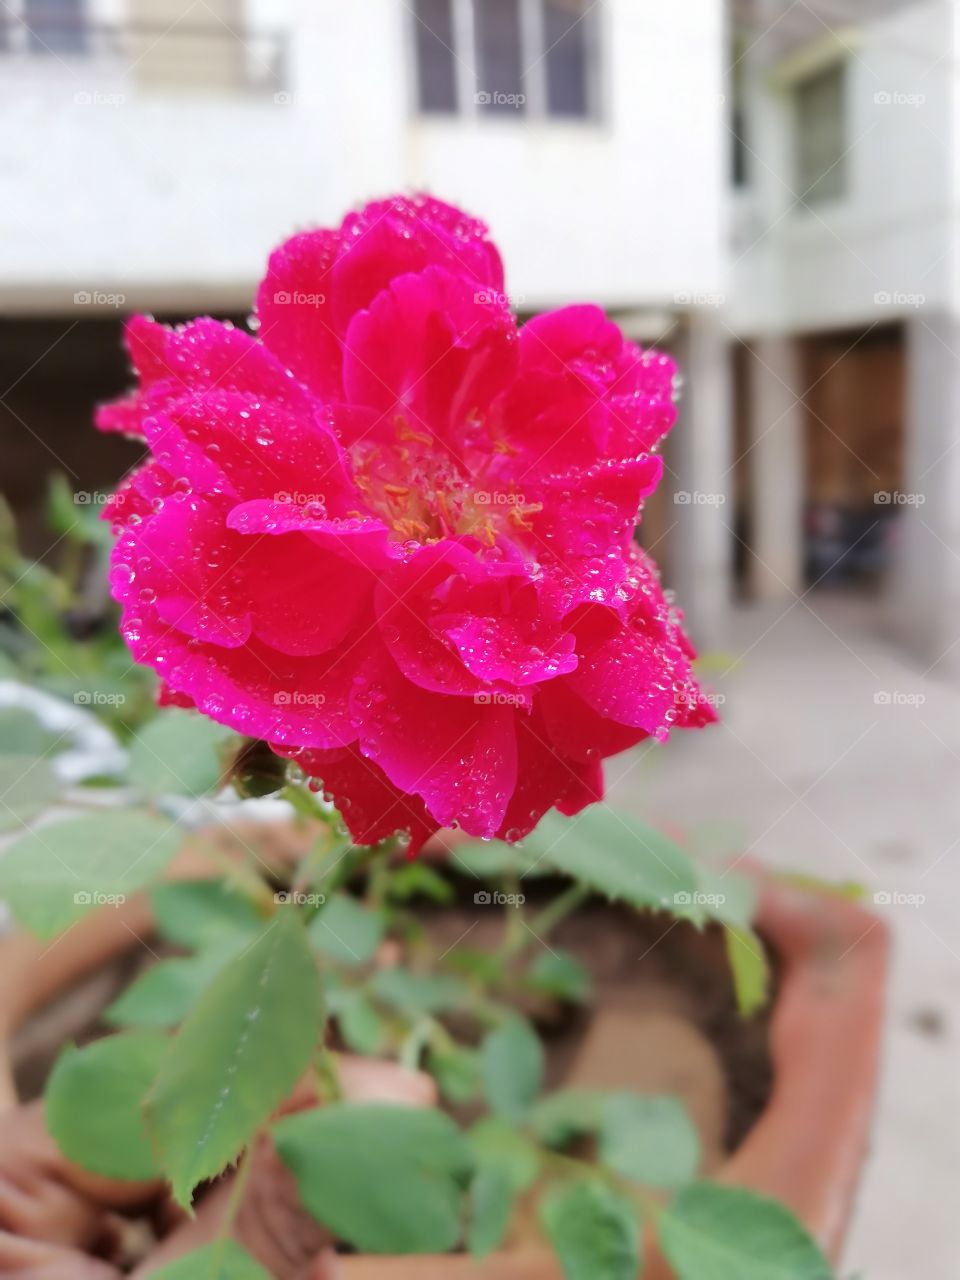 awesome looking rose